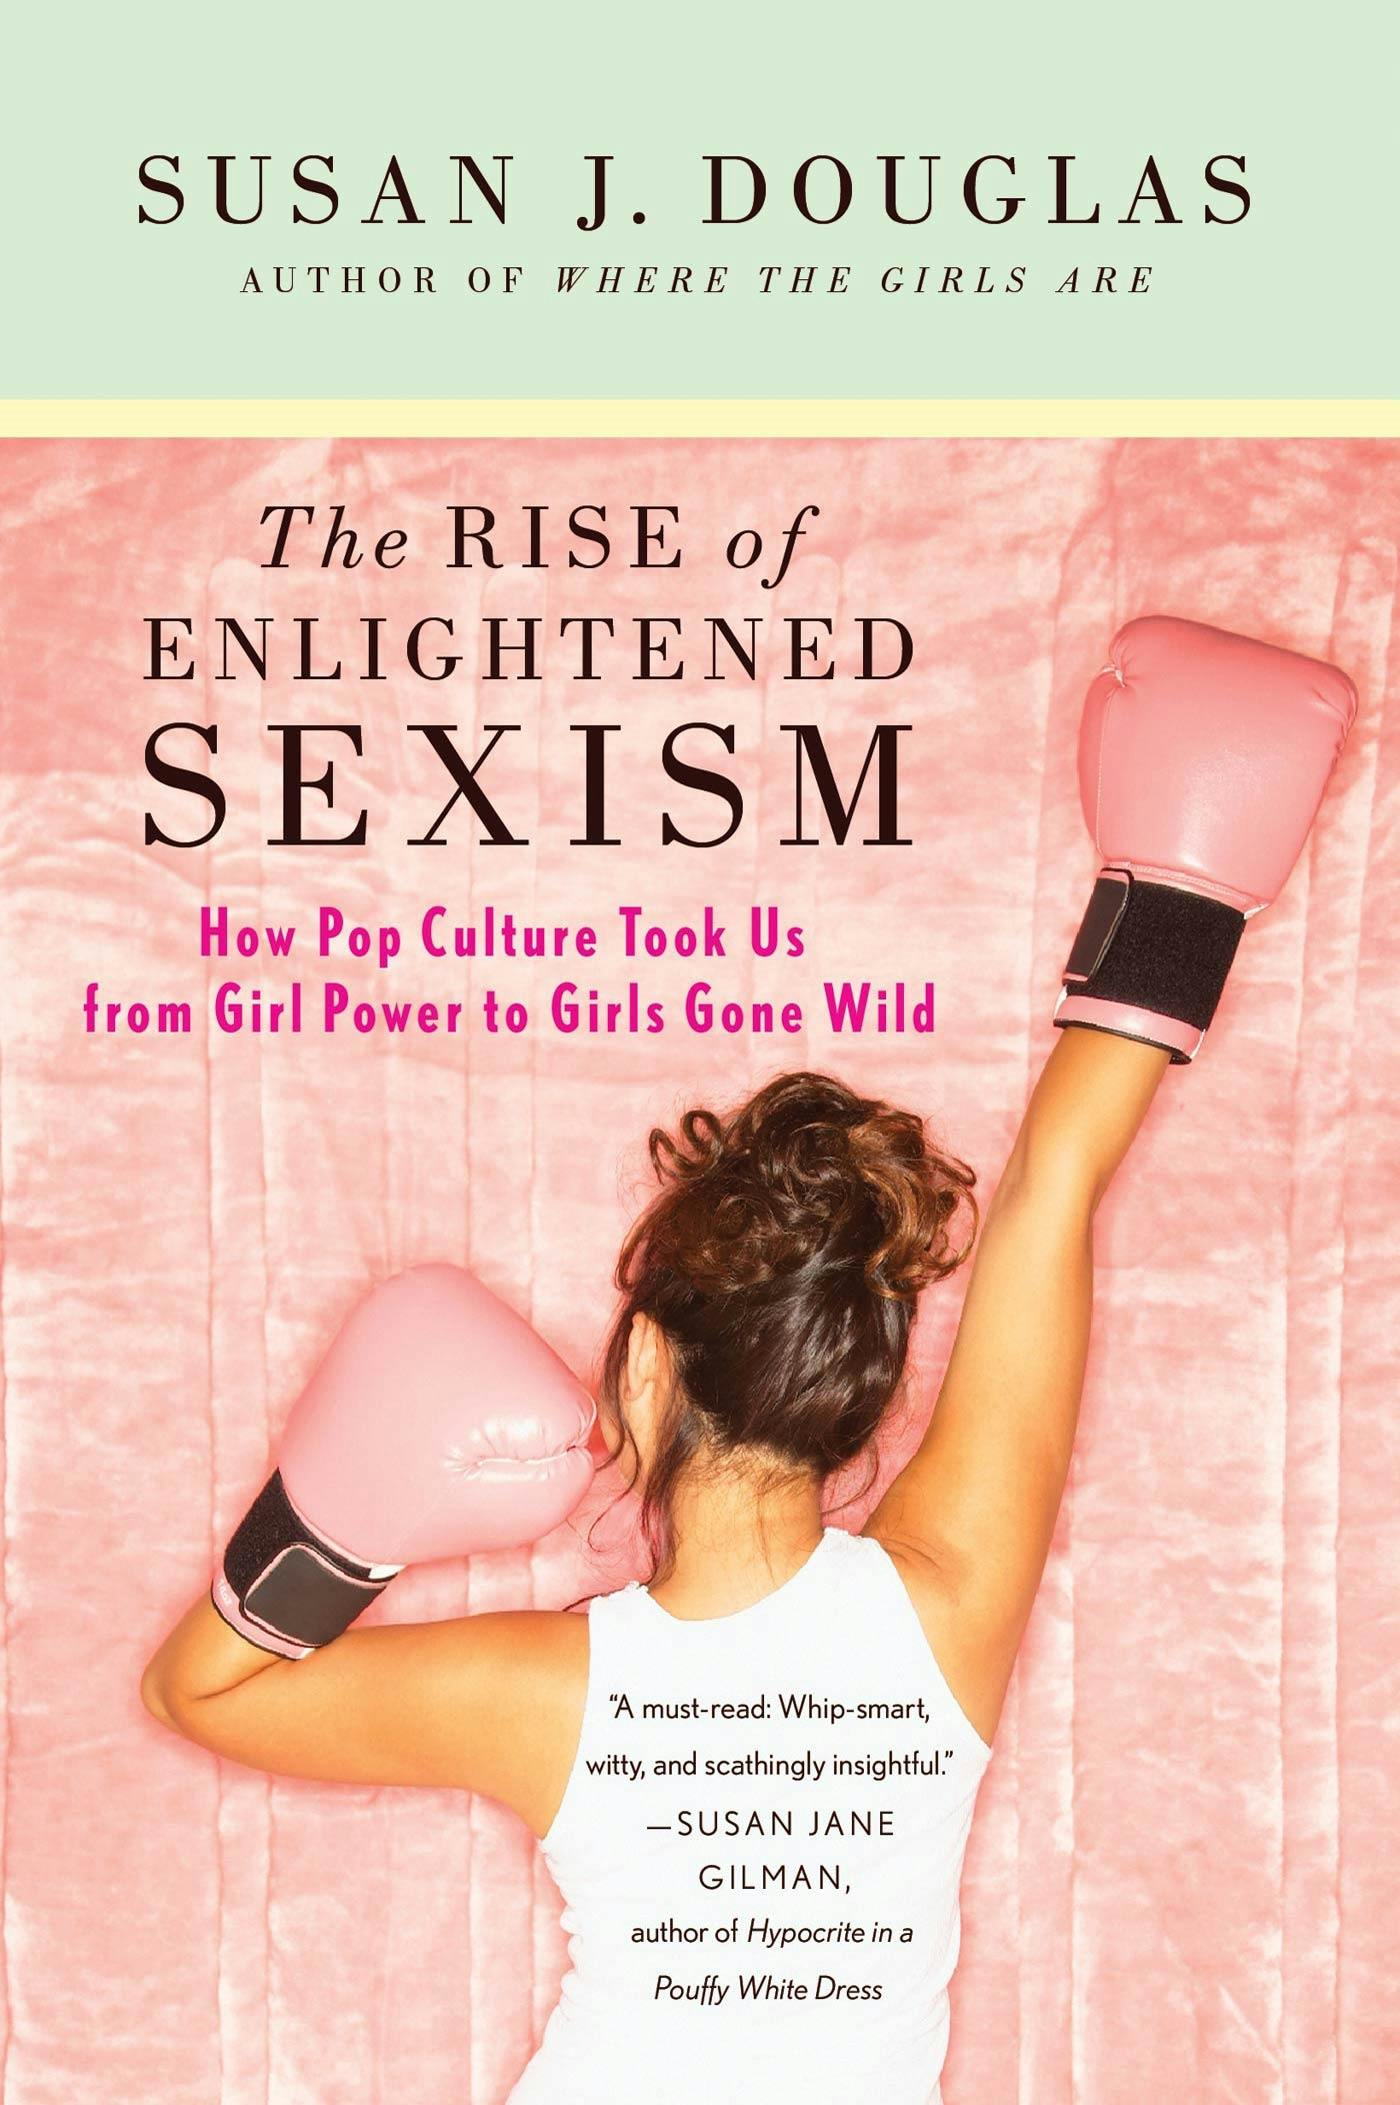 The Rise of Enlightened Sexism image pic